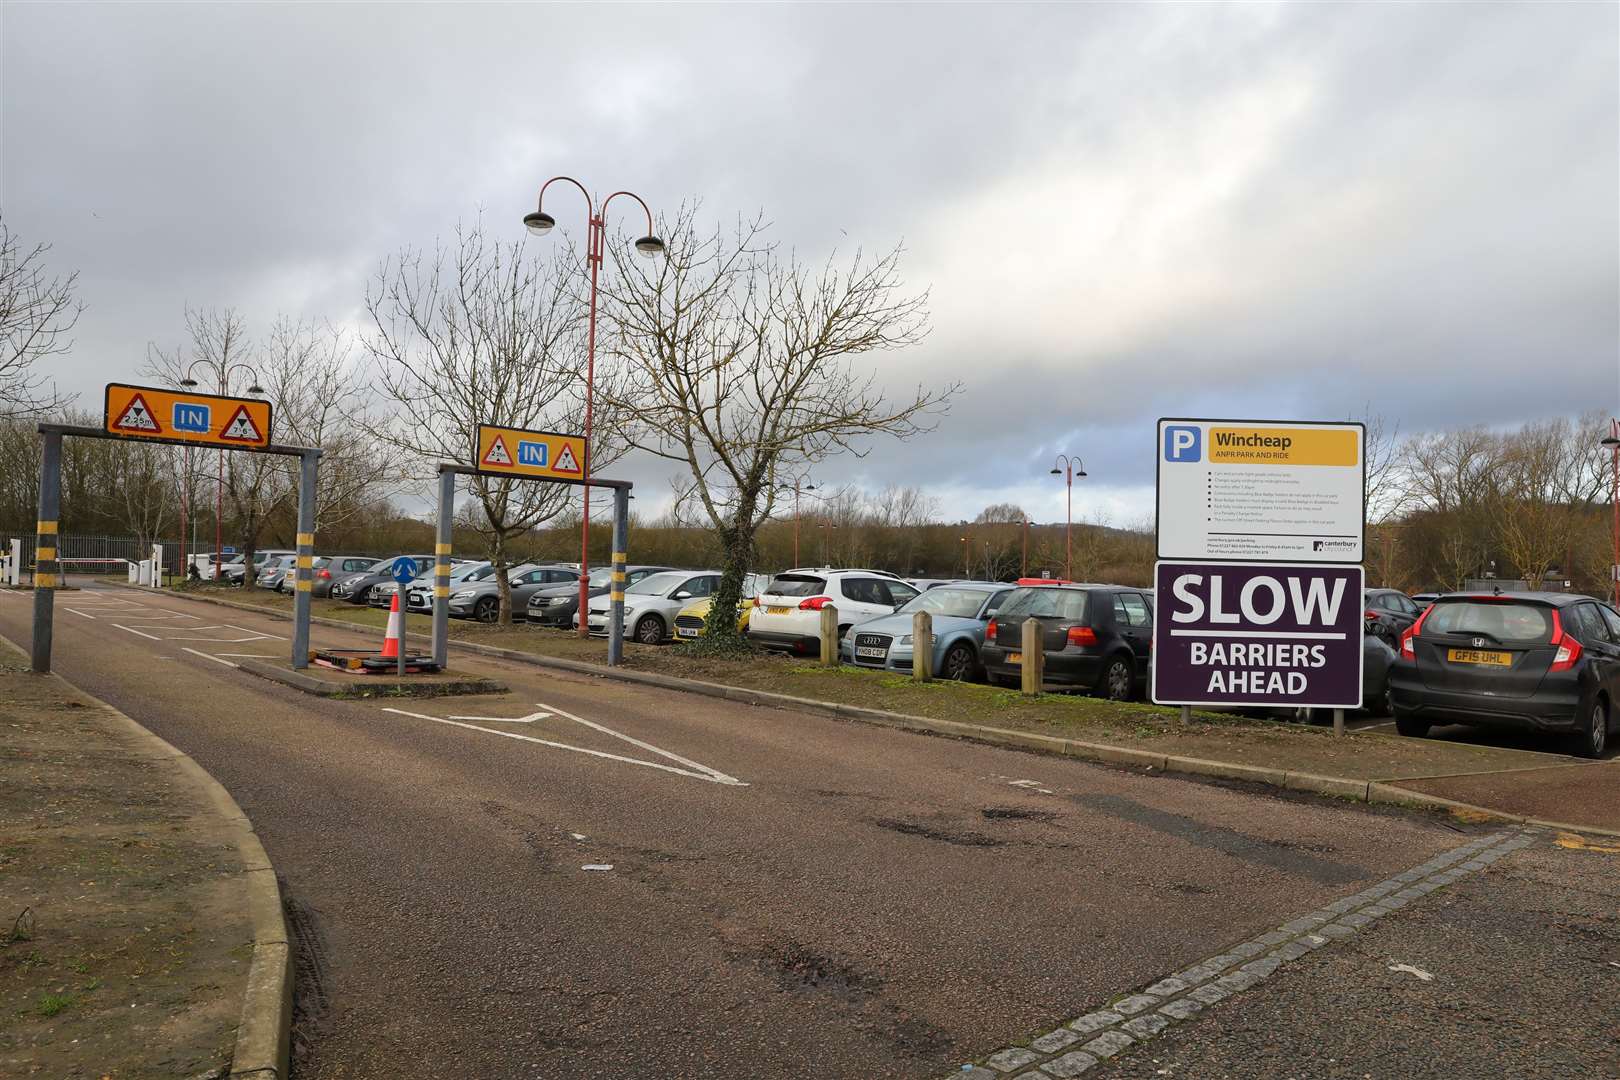 Wincheap park and ride is the second most-used in the city, behind New Dover Road